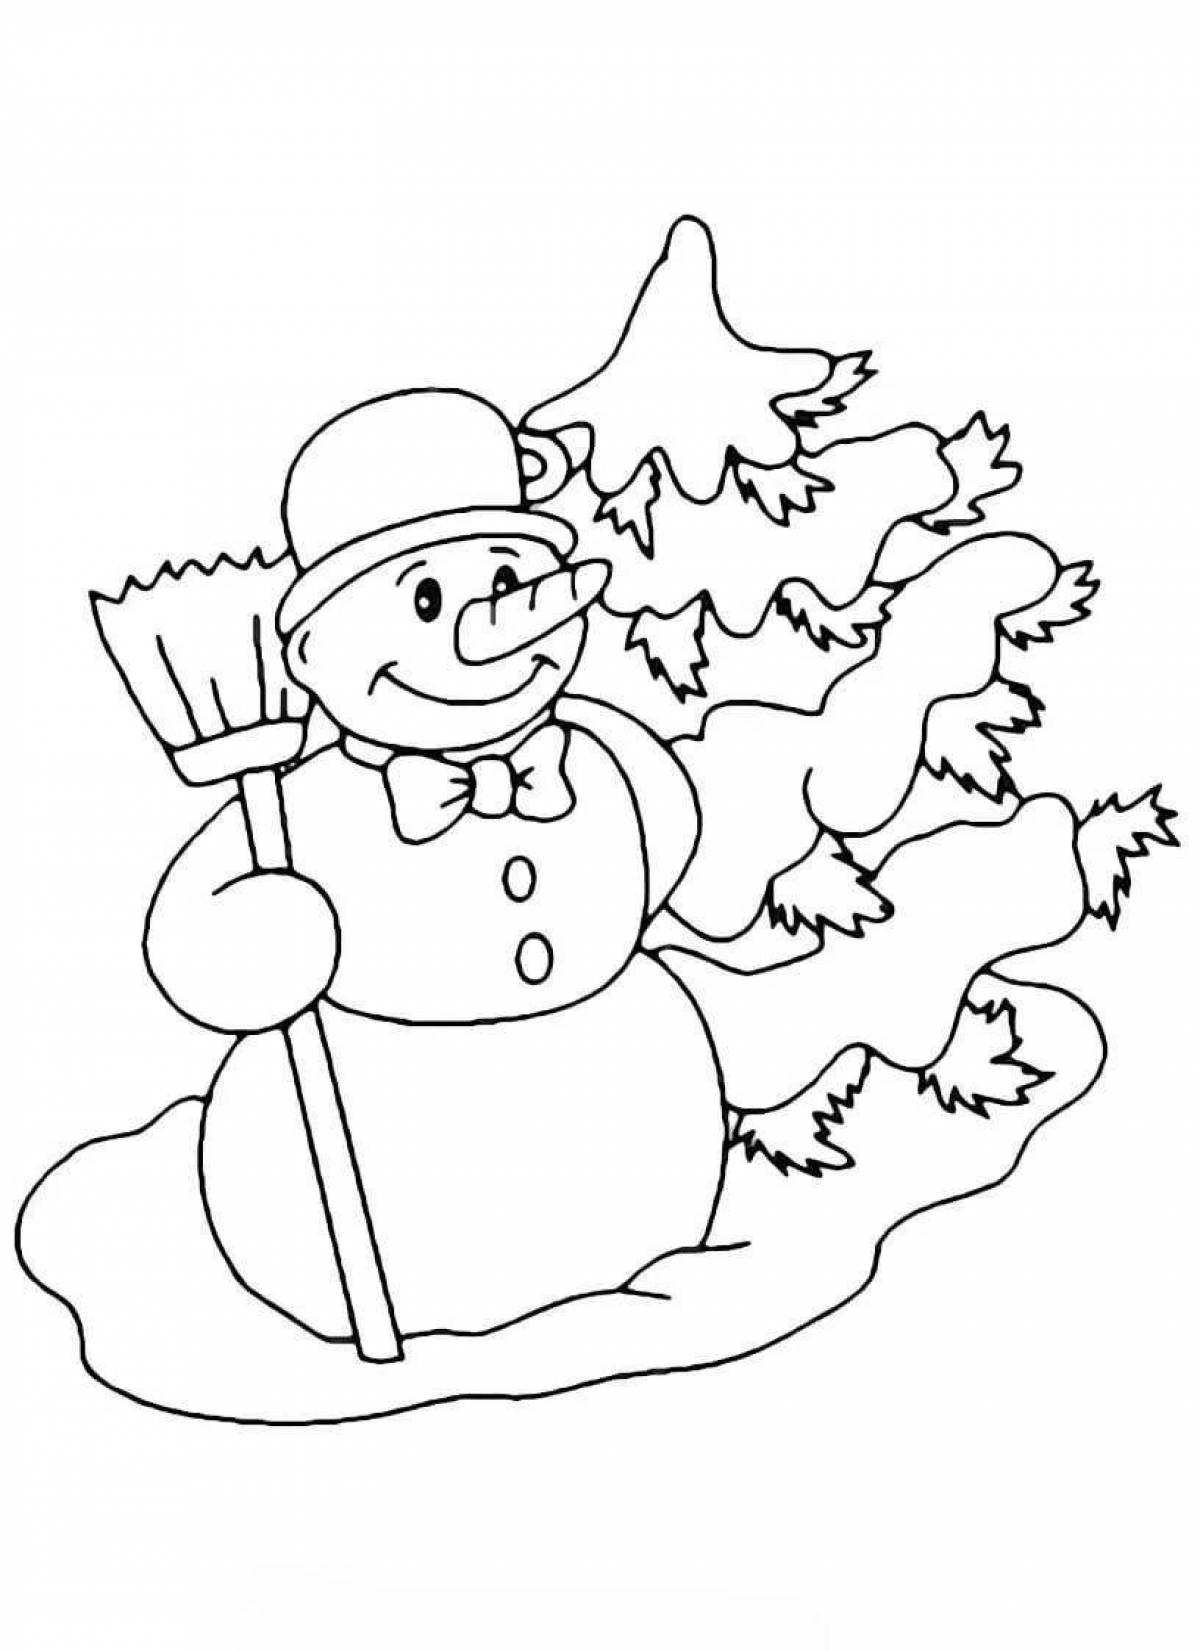 Sparkling tree and snowman coloring page